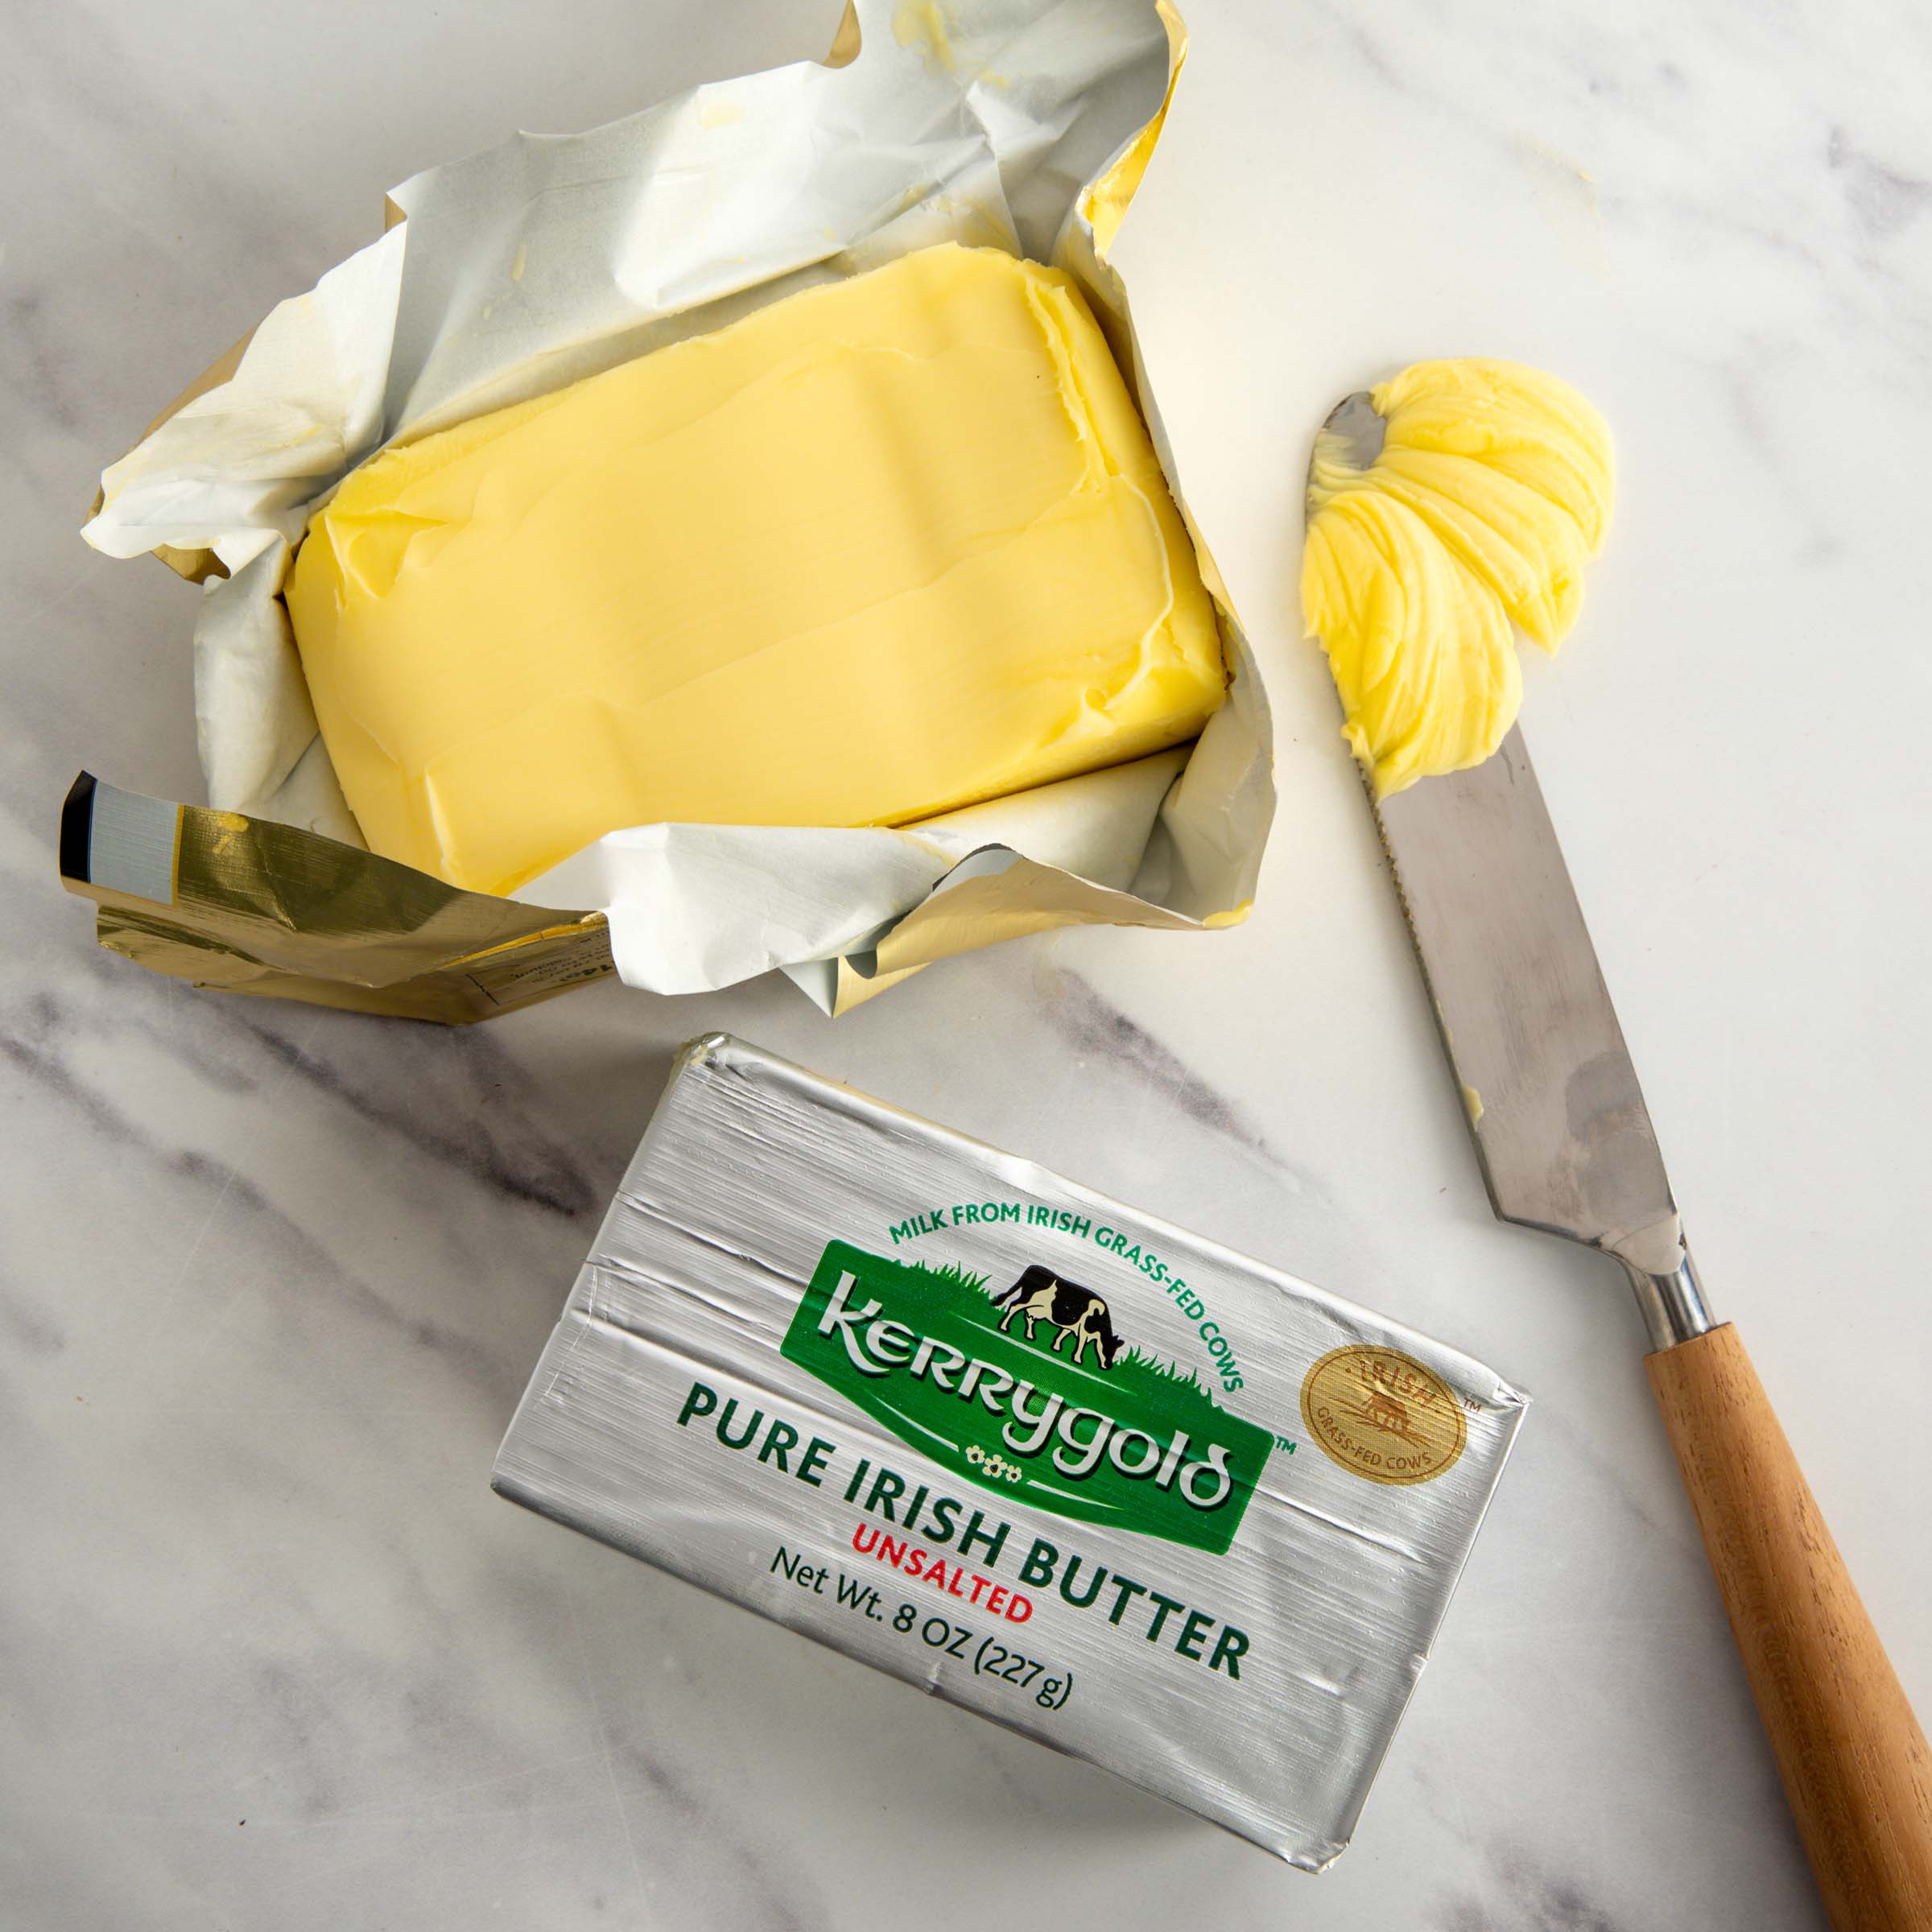 Kerrygold Unsalted Butter, 8 Oz Foil Pack (Pack of 5)